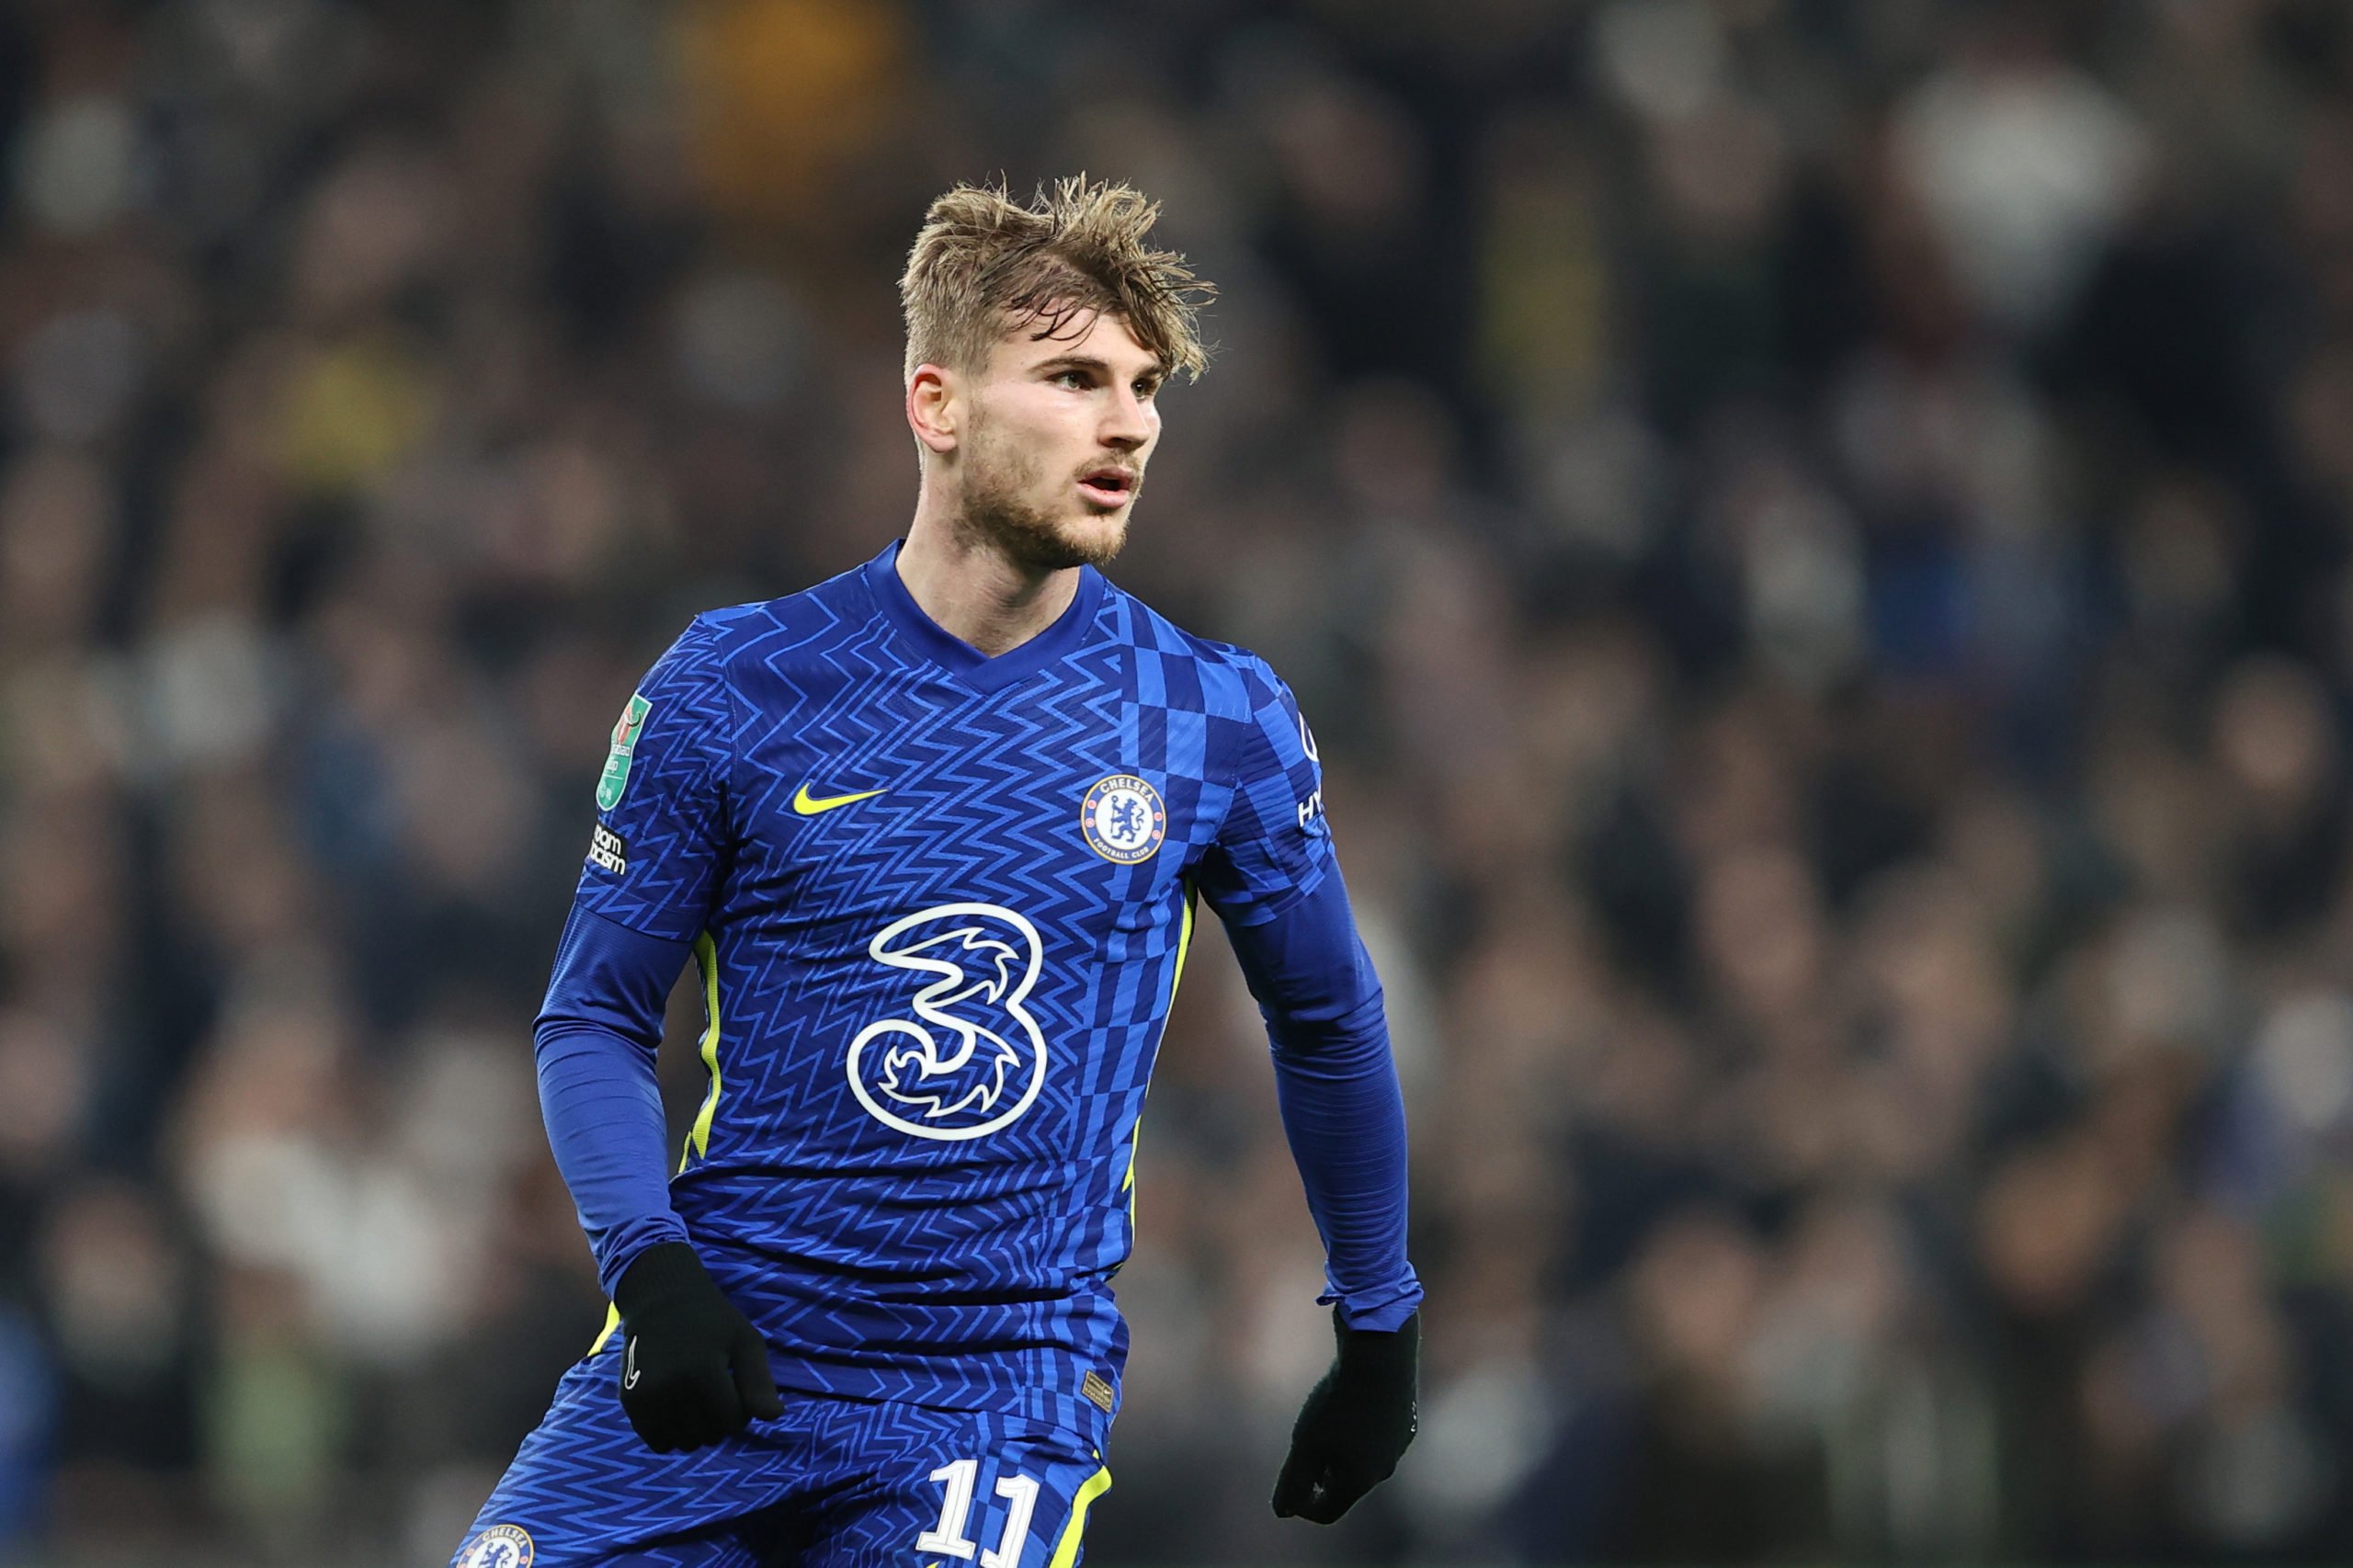 ‘A heavy heart’: Timo Werner says he would be gutted if two of his Chelsea teammates left the club